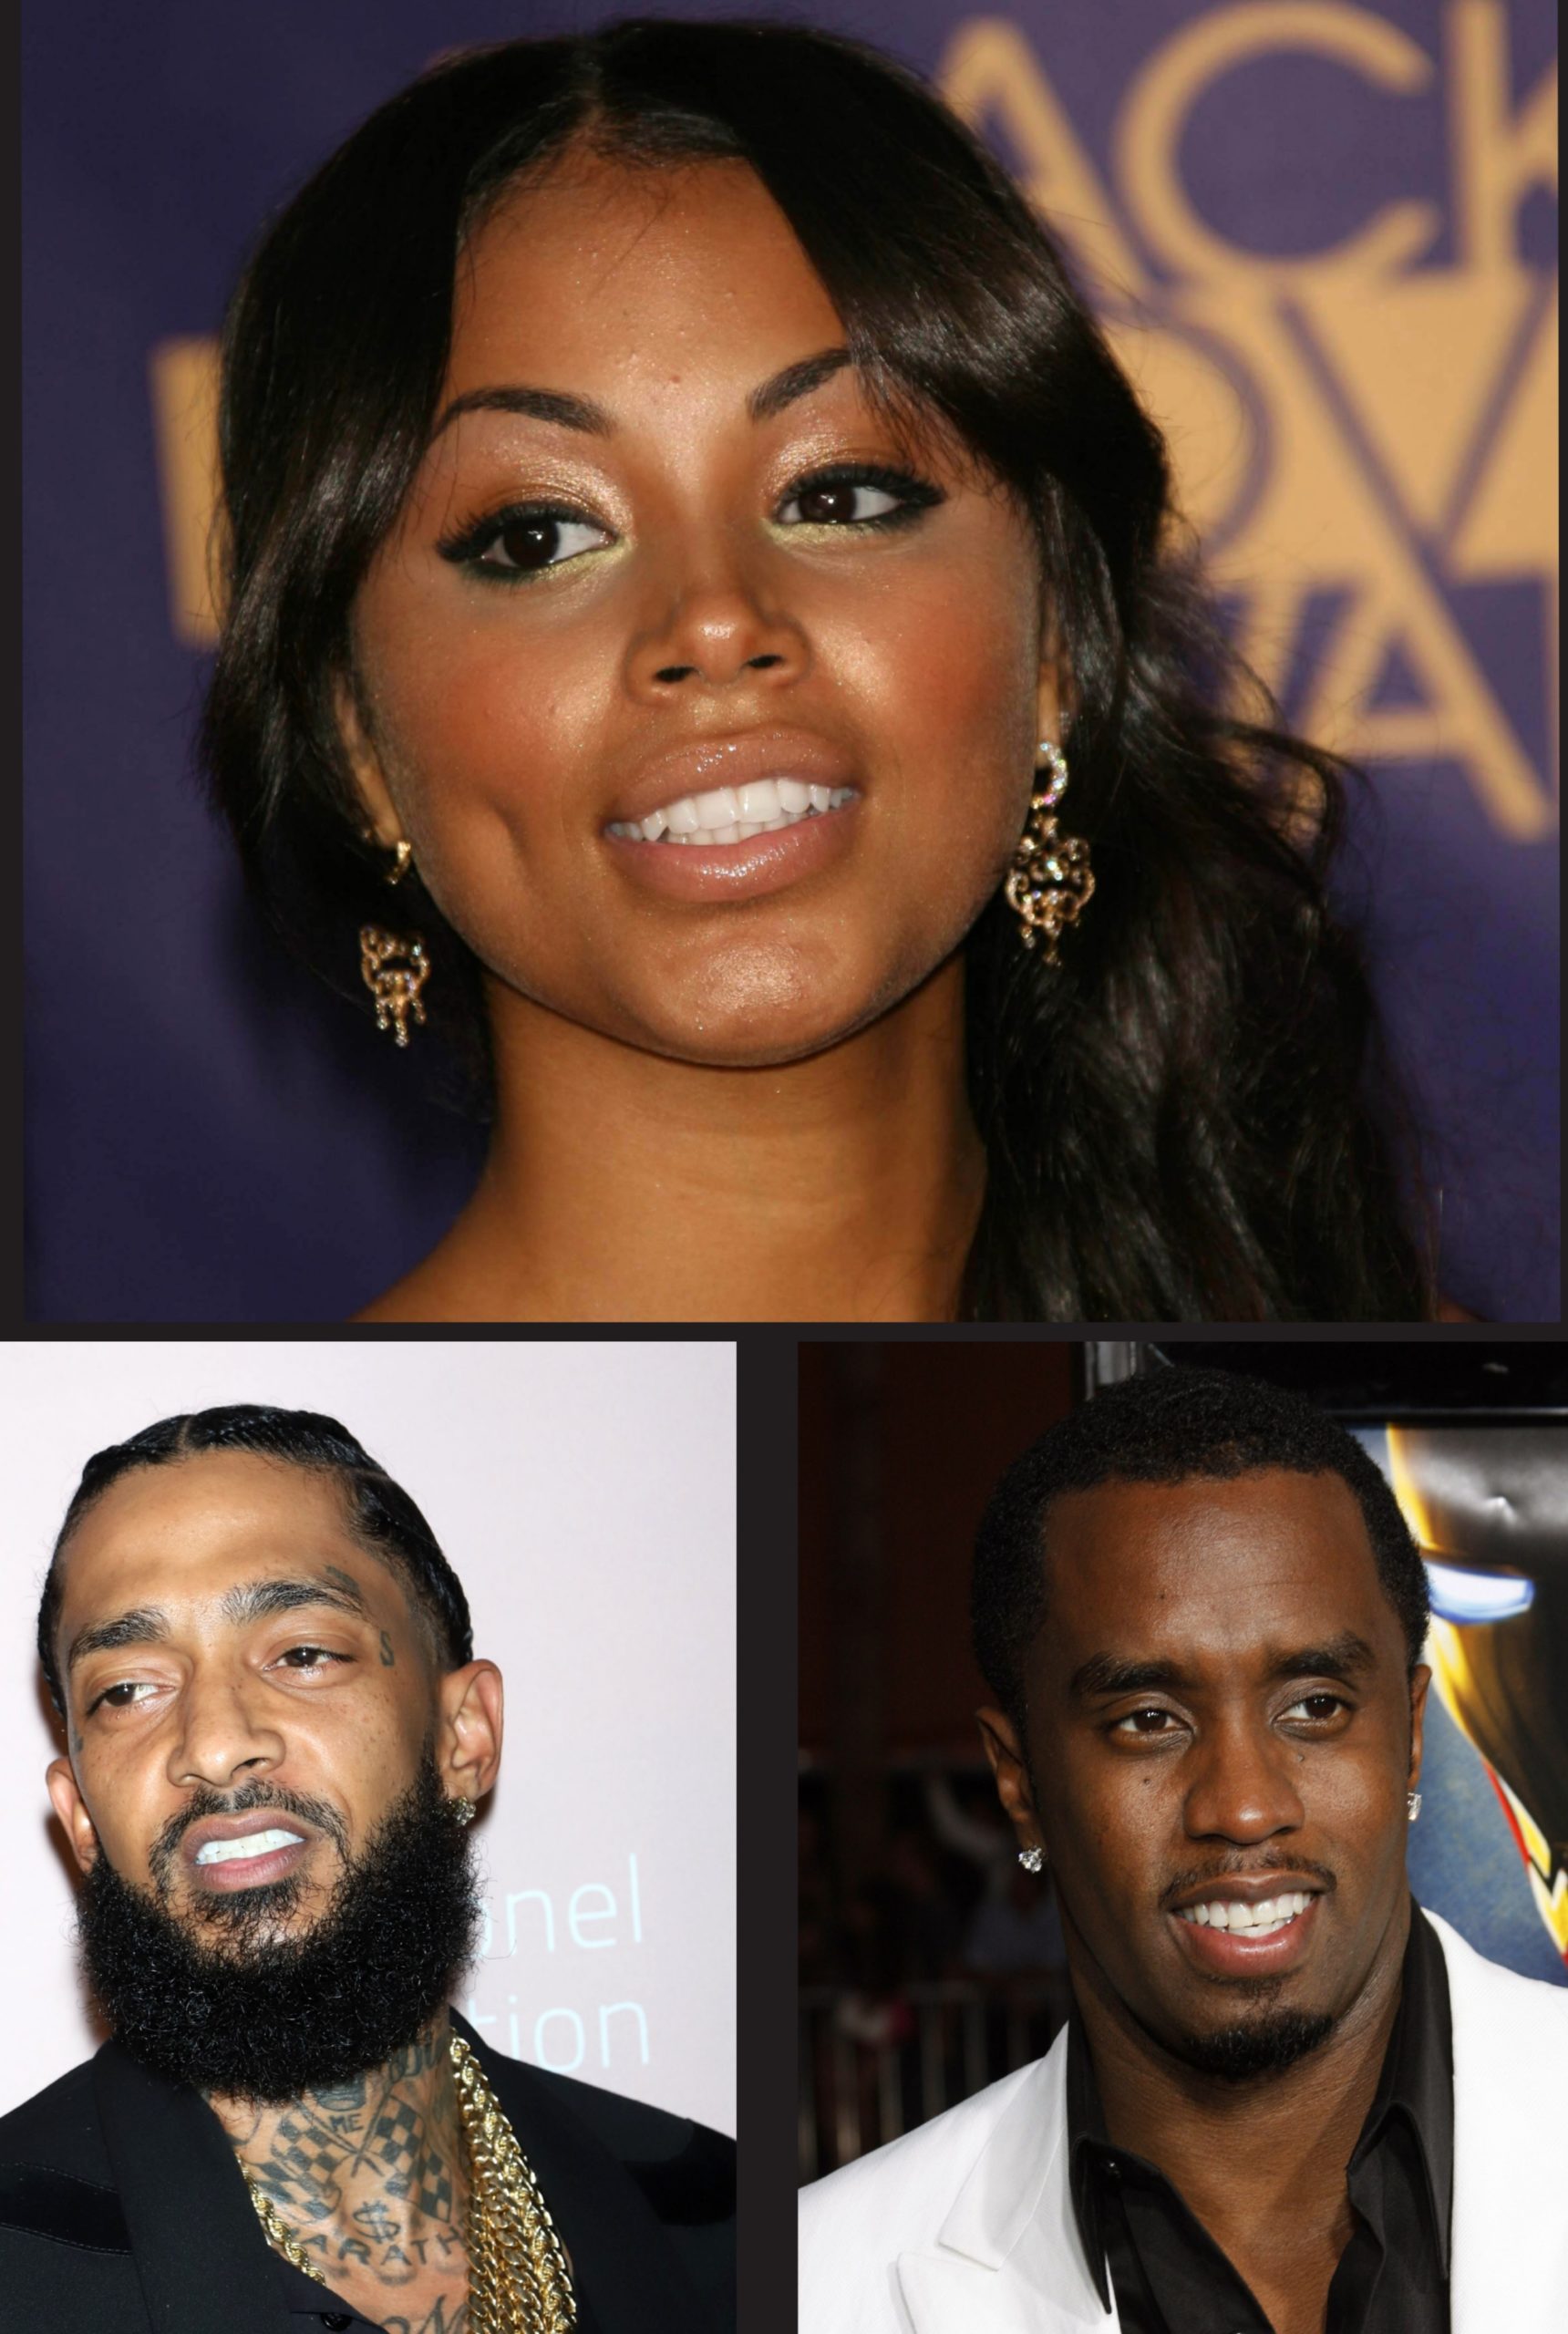 Breaking News! Lauren London NO I Am NOT Dating Diddy!